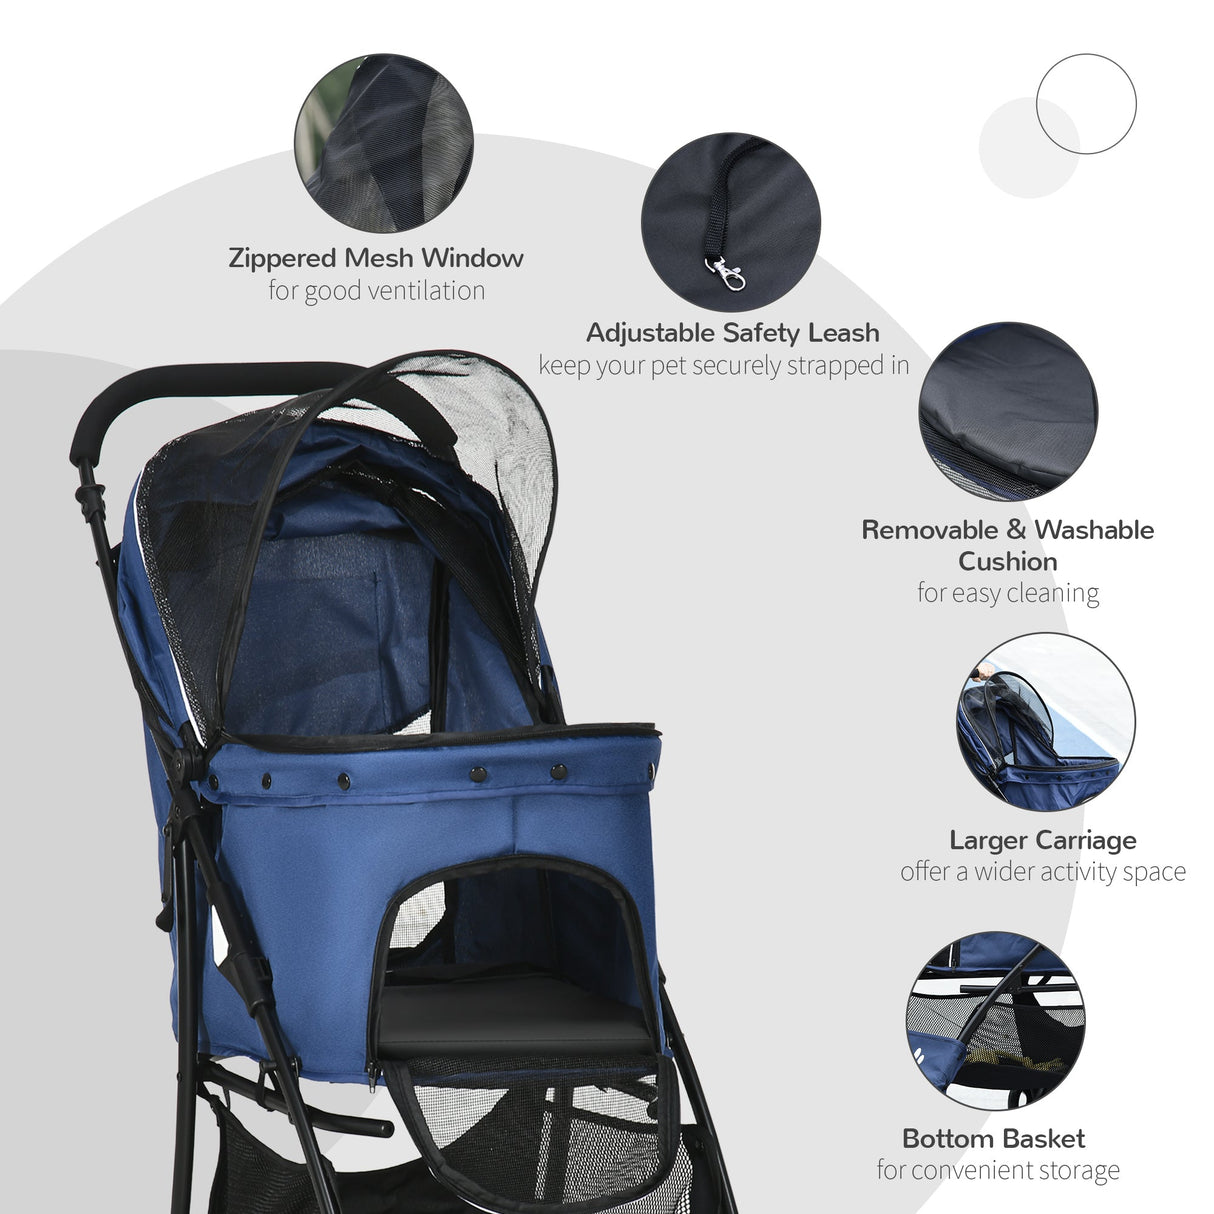 Compact Folding Pet Stroller - Large Carriage & Brakes for Small Sized Dogs, PawHut, Dark Blue